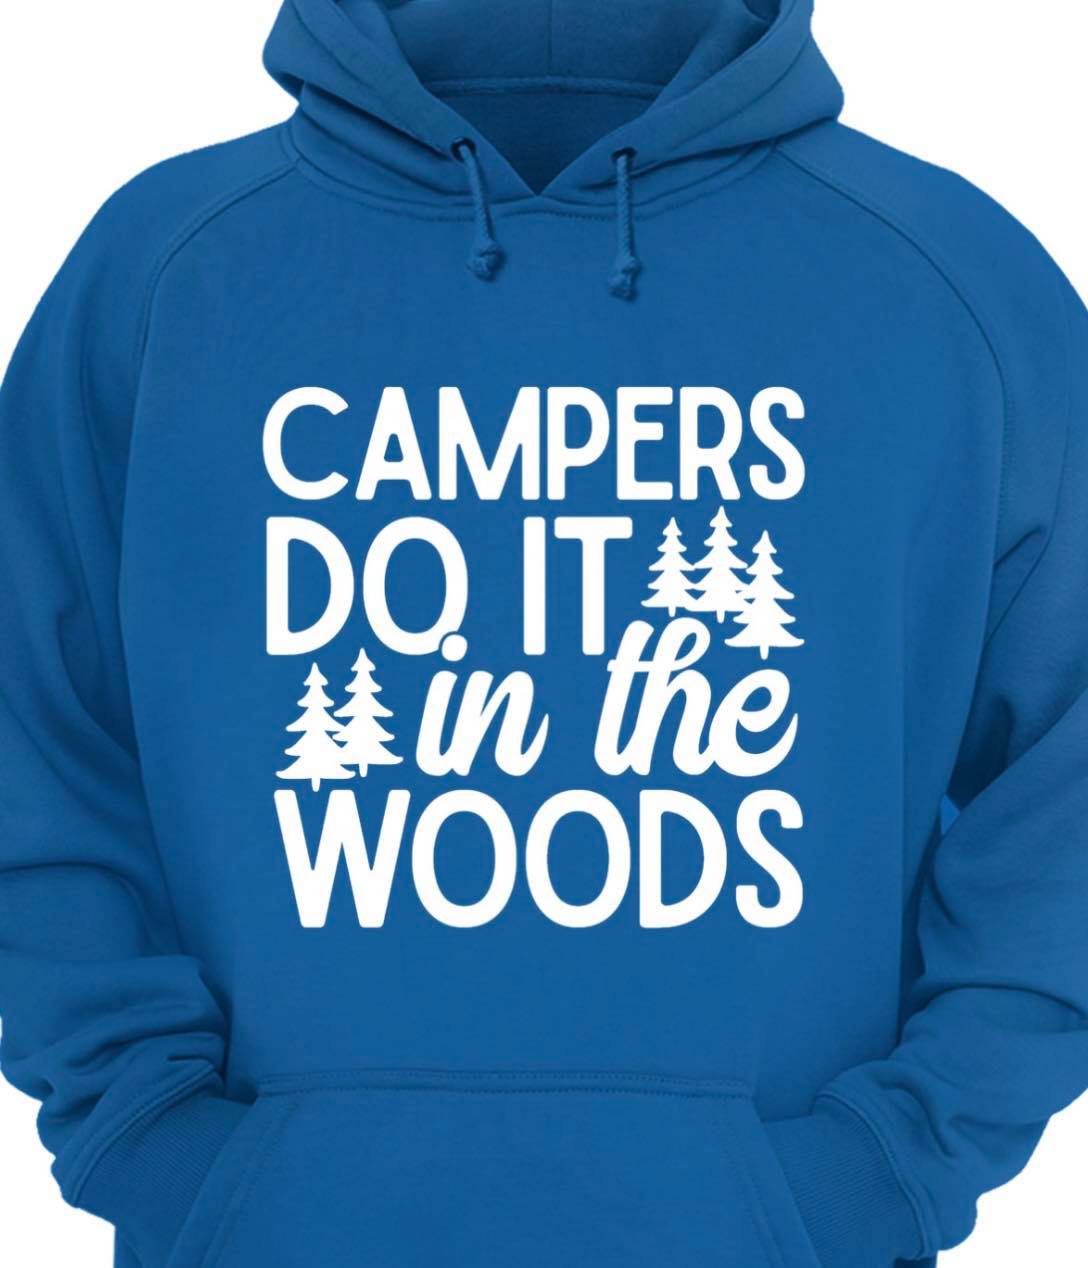 Campers do it in the woods